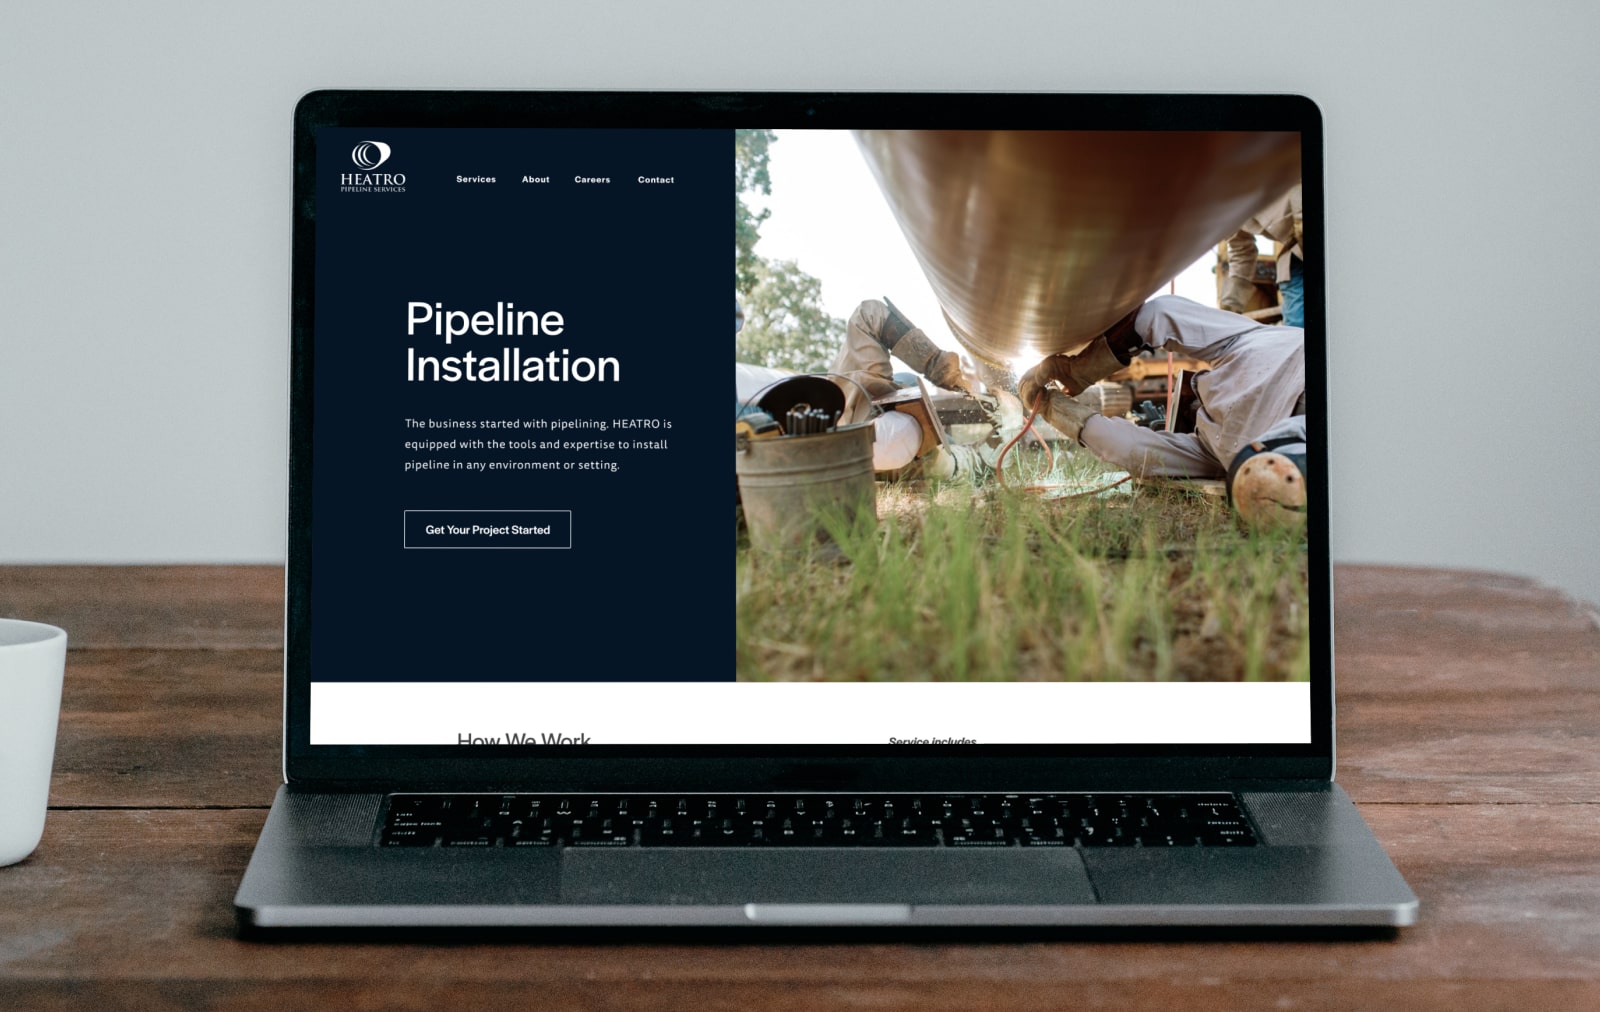 Pipeline construction services displayed on a laptop.